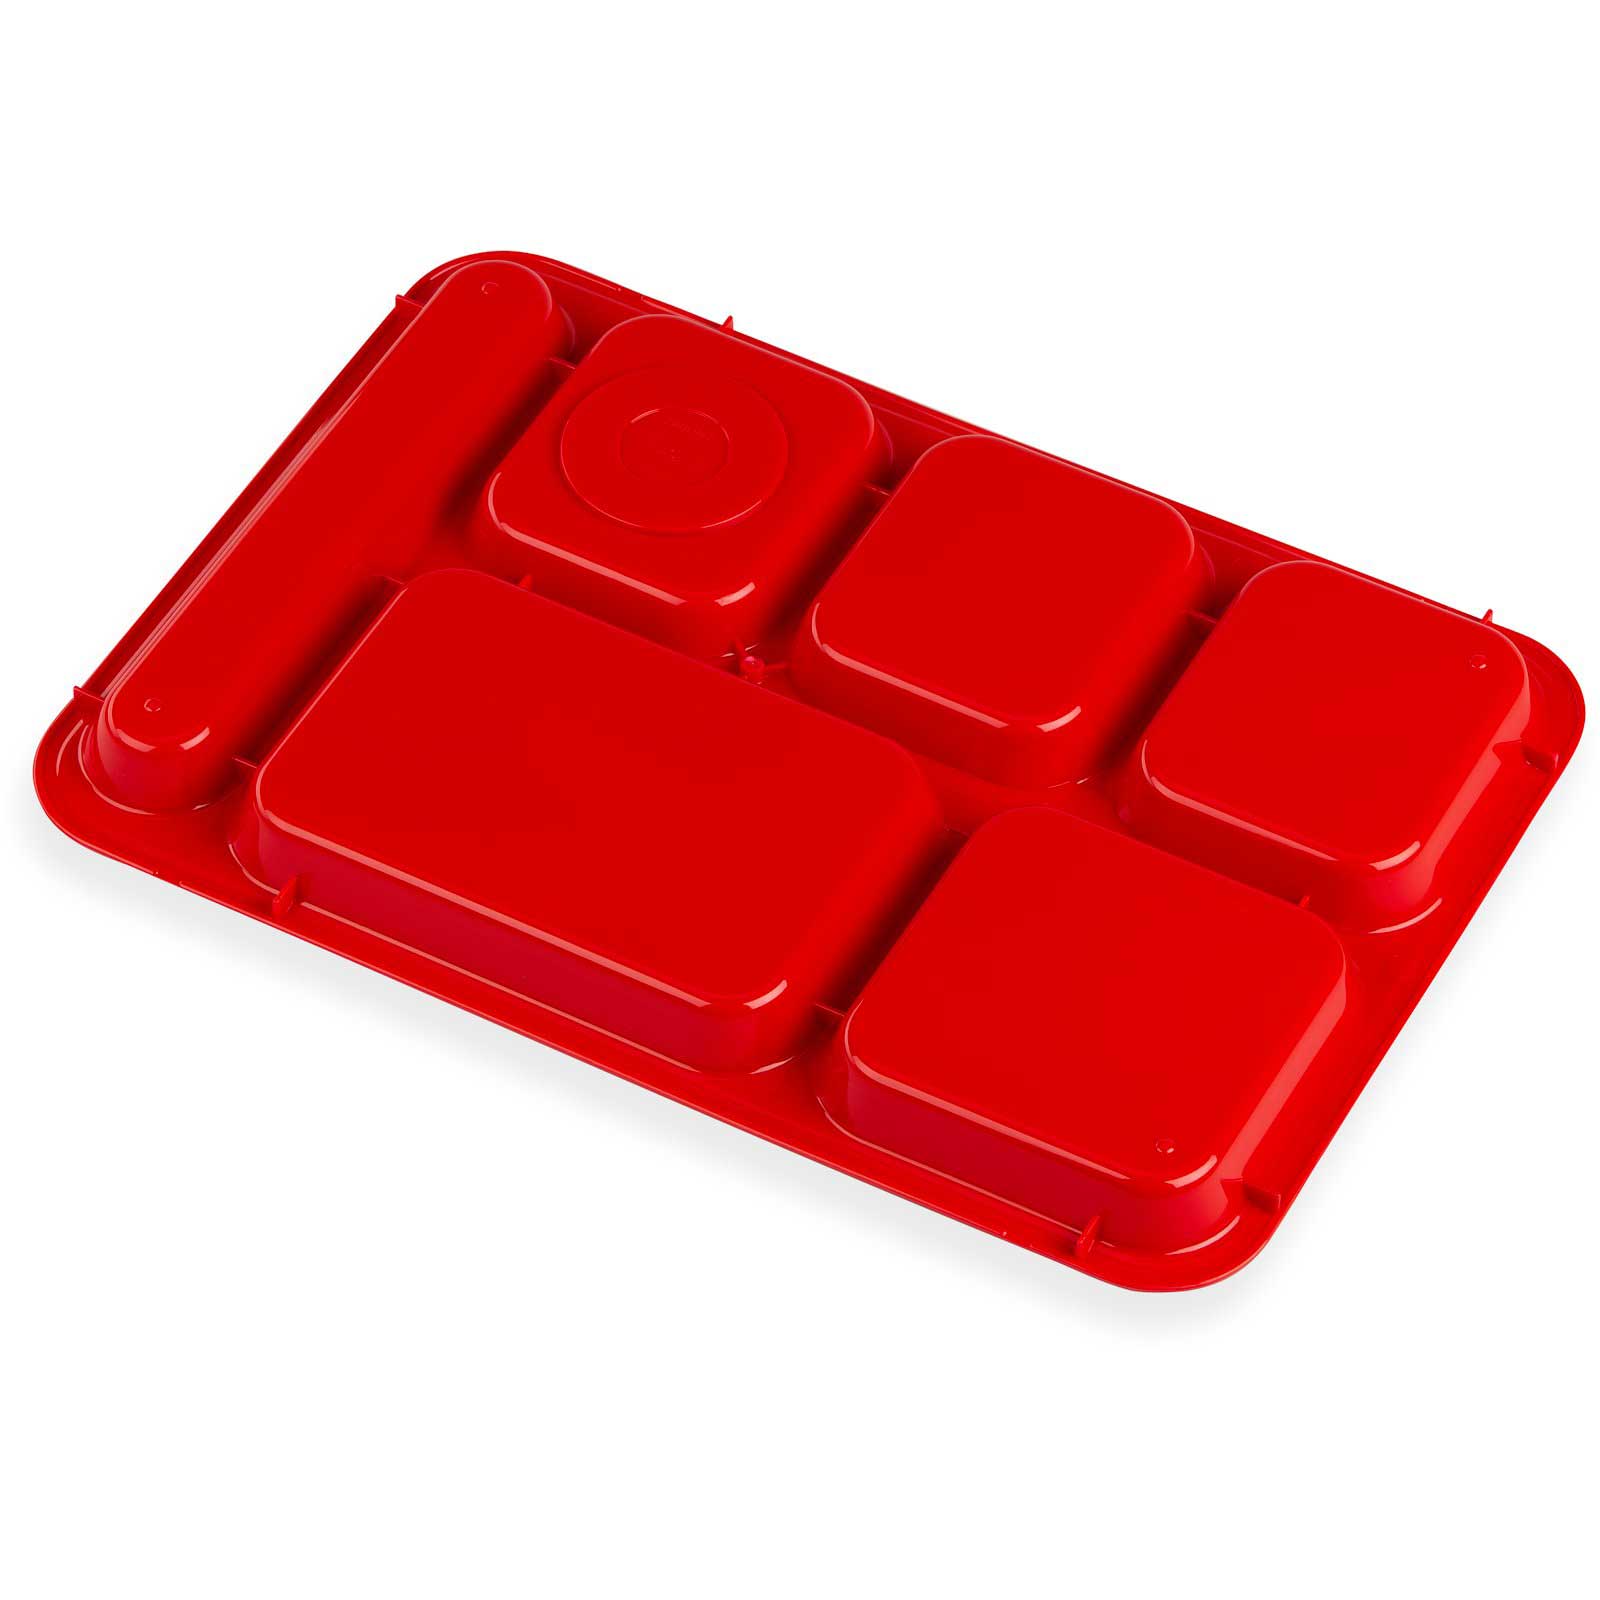 Carlisle P614R05 10 x 14 Red Right Hand 6 Compartment Tray